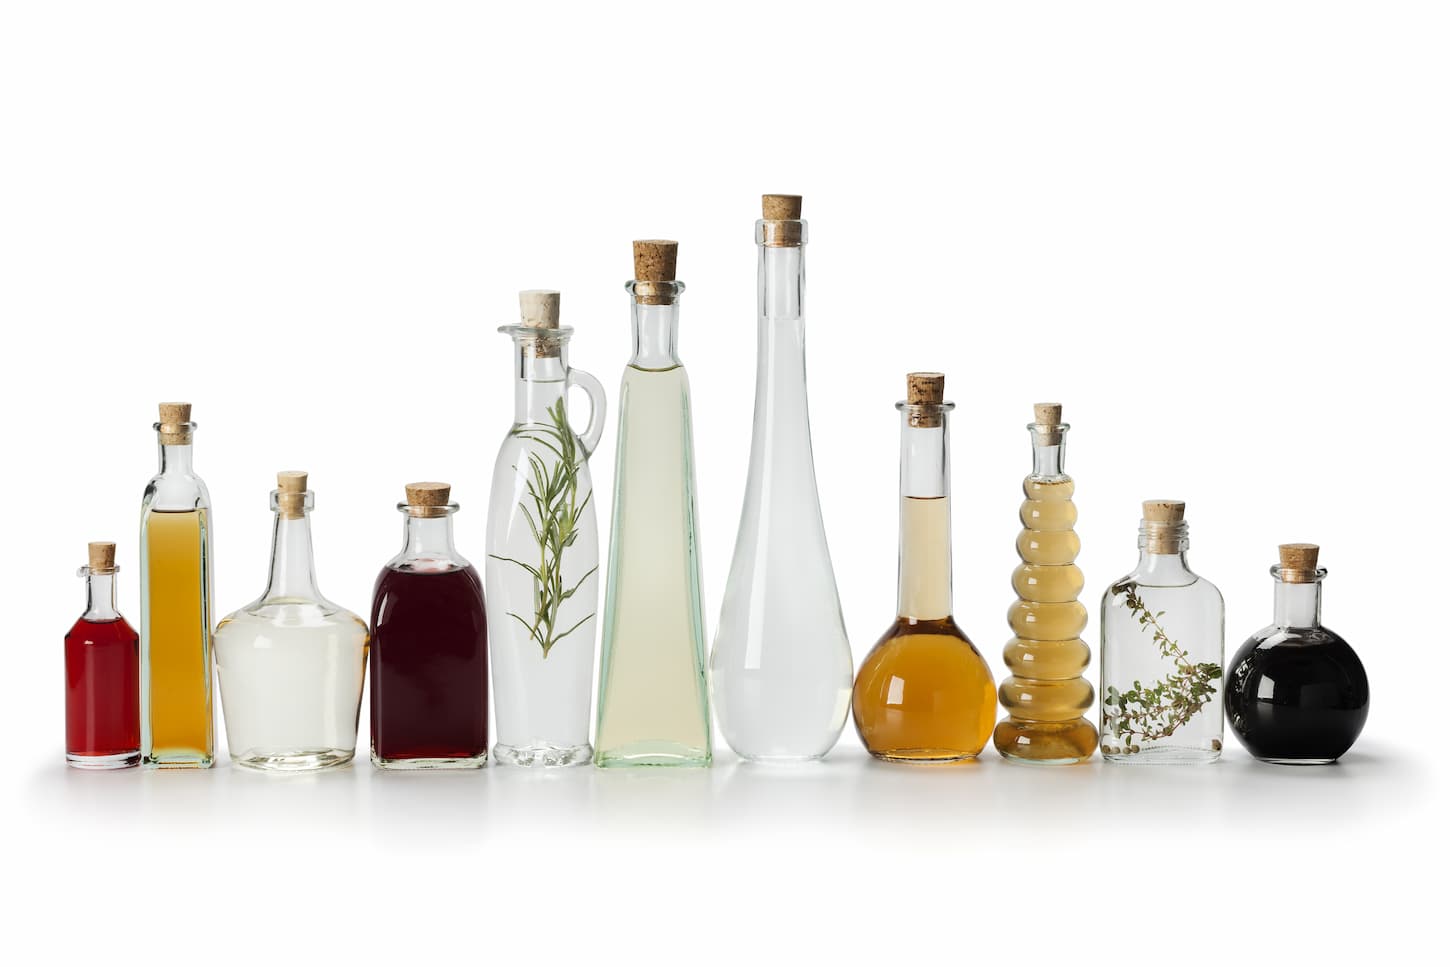 An image of Row of bottles with vinegar.